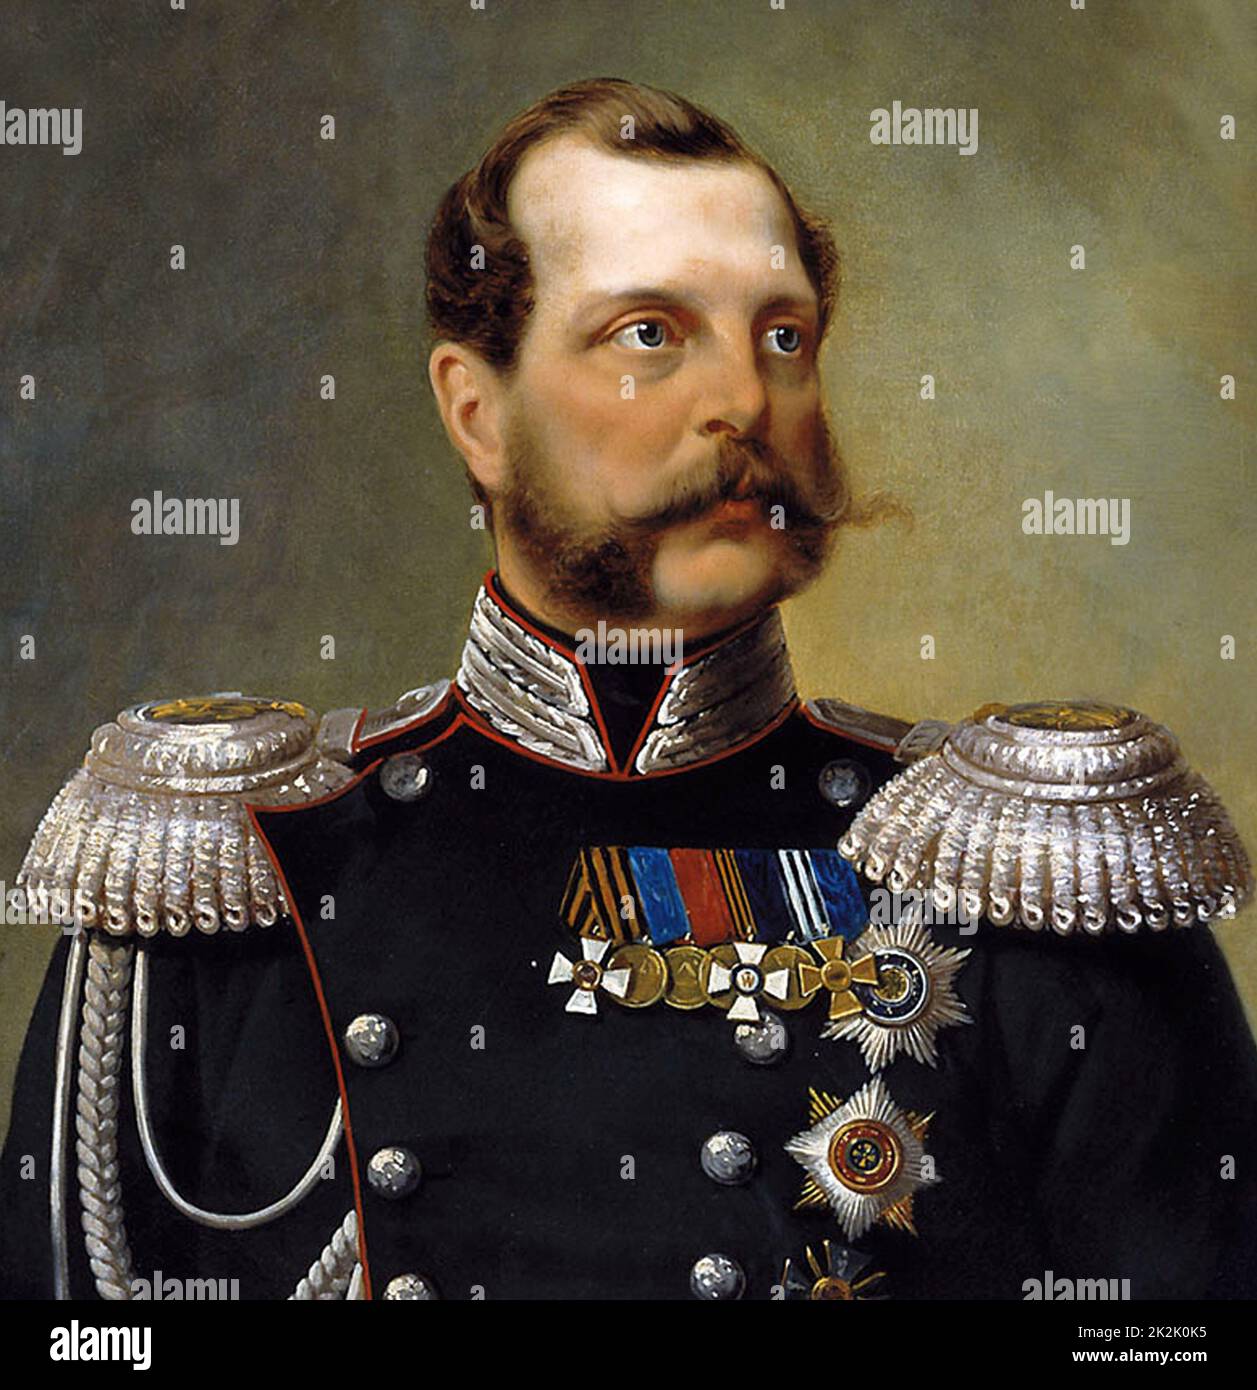 Alexander II 1818 – 1881. known as Alexander the Liberator was the Emperor, or Tsar, of the Russian Empire from 3 March 1855 until his assassination in 1881. Stock Photo